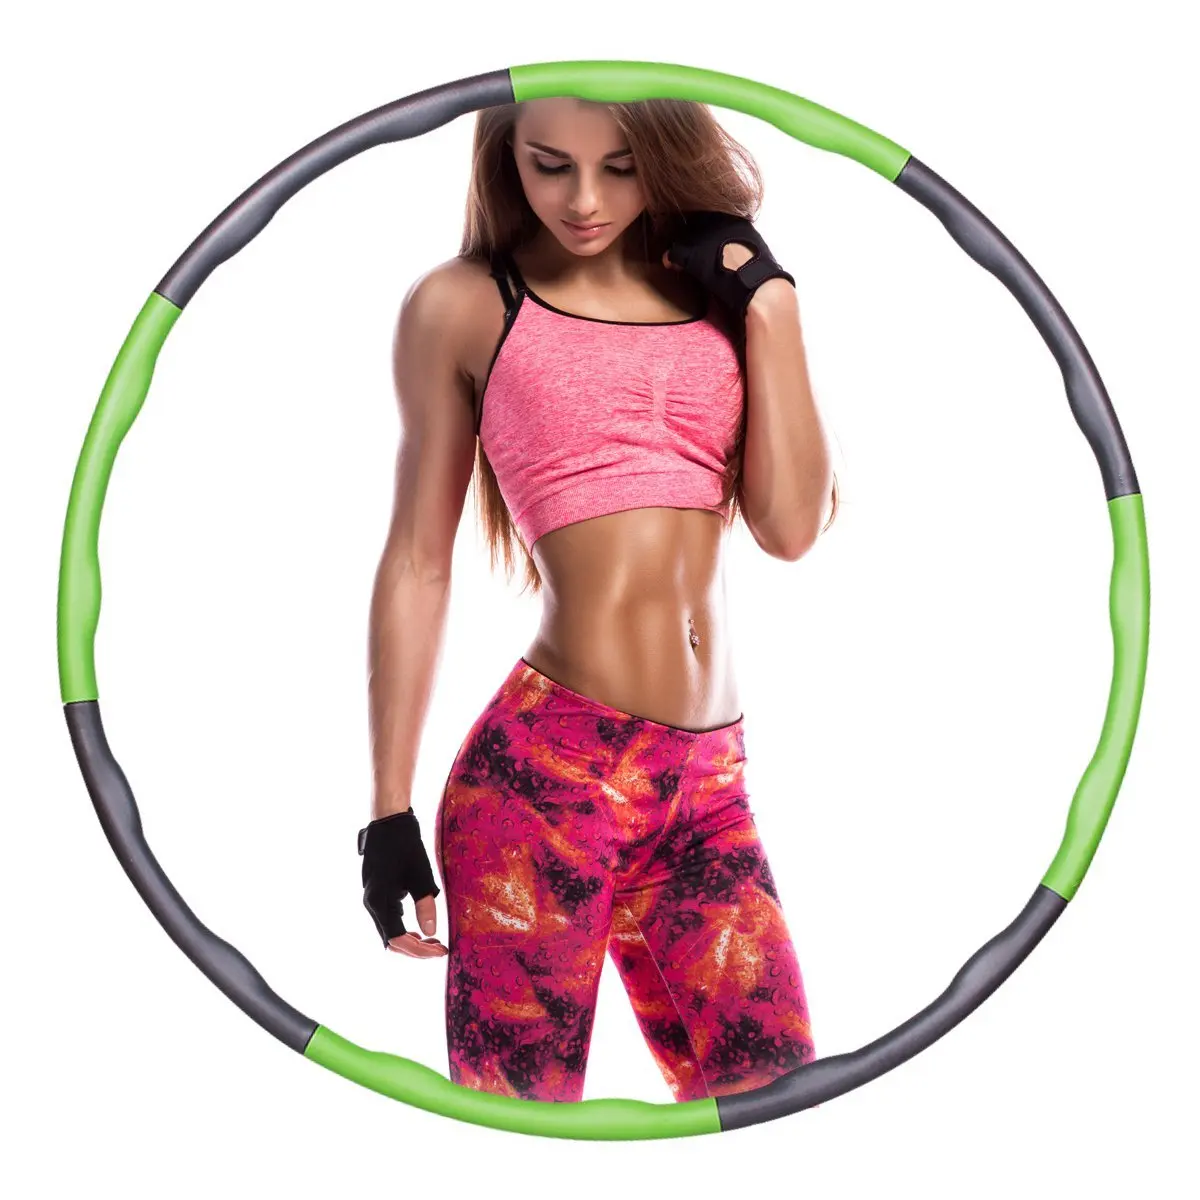 where can i get a weighted hula hoop